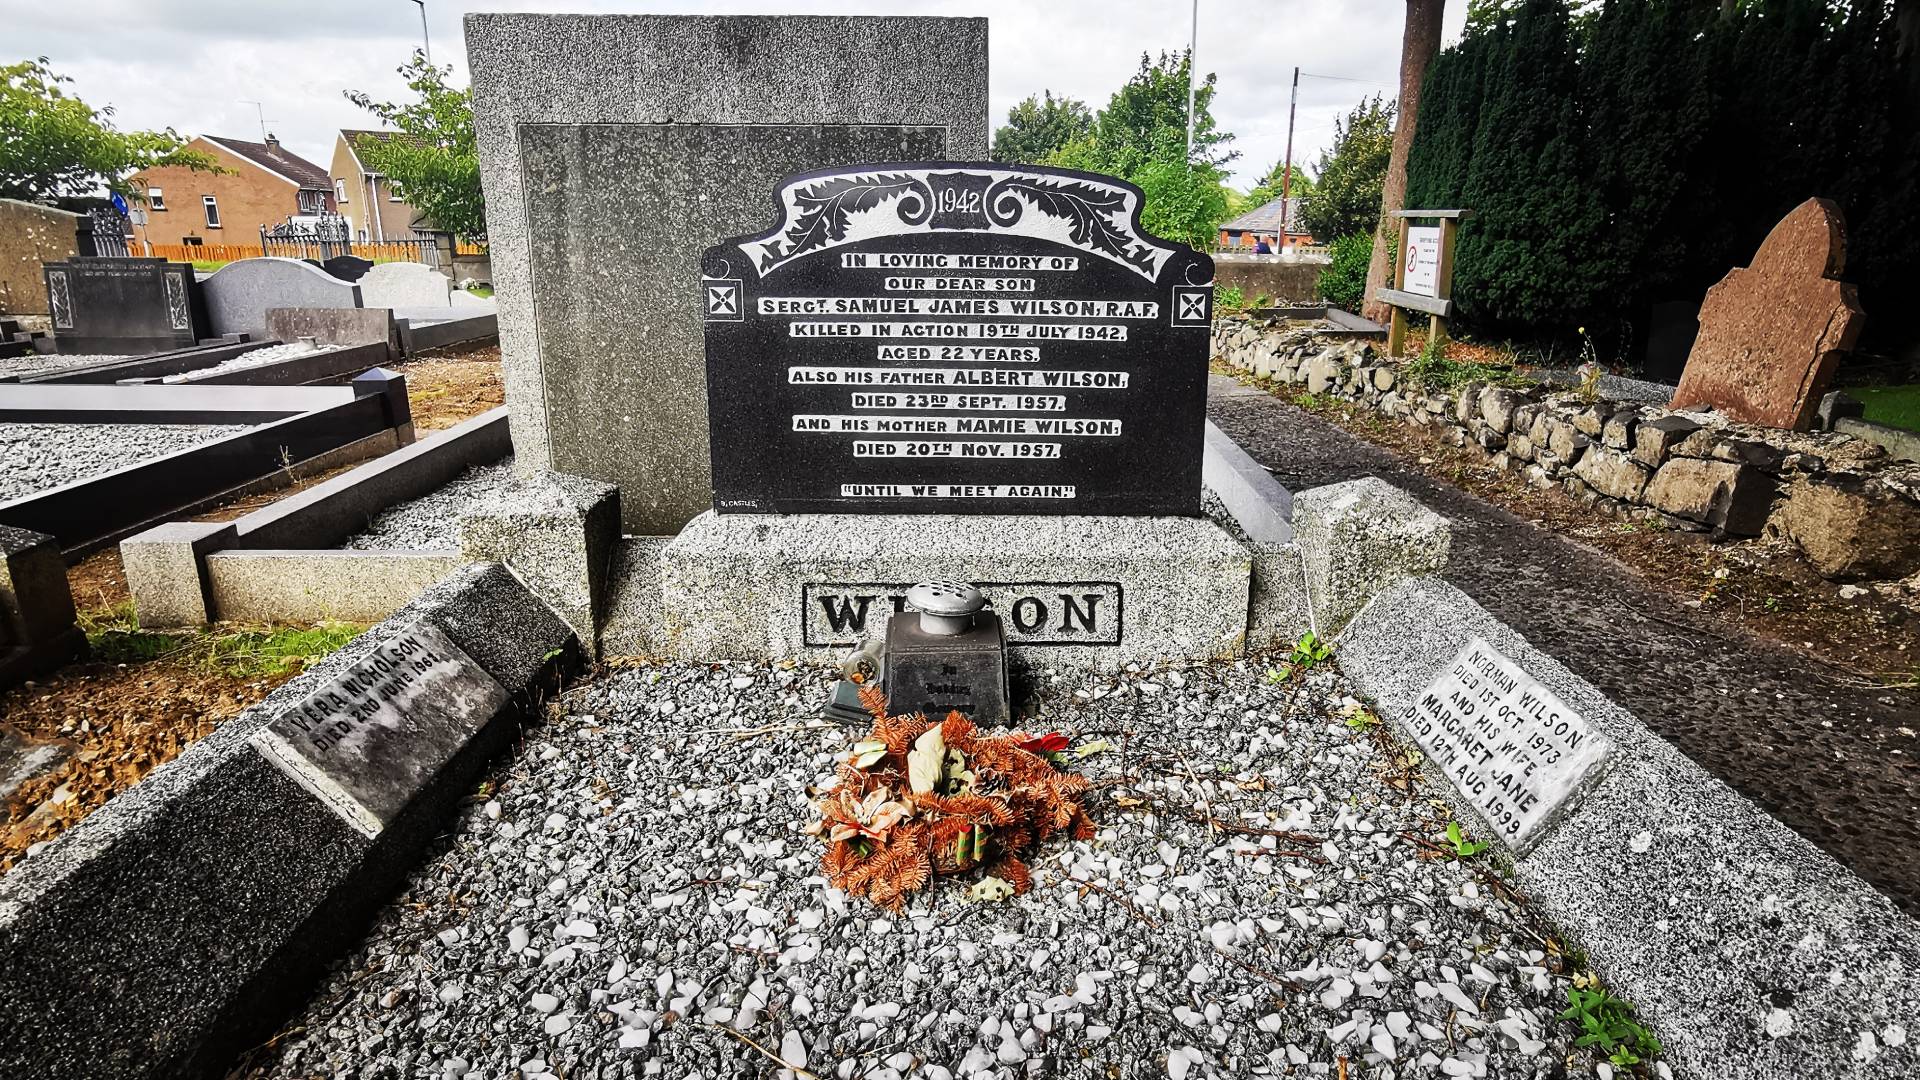 A family headstone marks the grave of Sergeant Samuel James Wilson in Seagoe (St. Gobhan's) Church of Ireland Churchyard, Portadown, Co. Armagh.